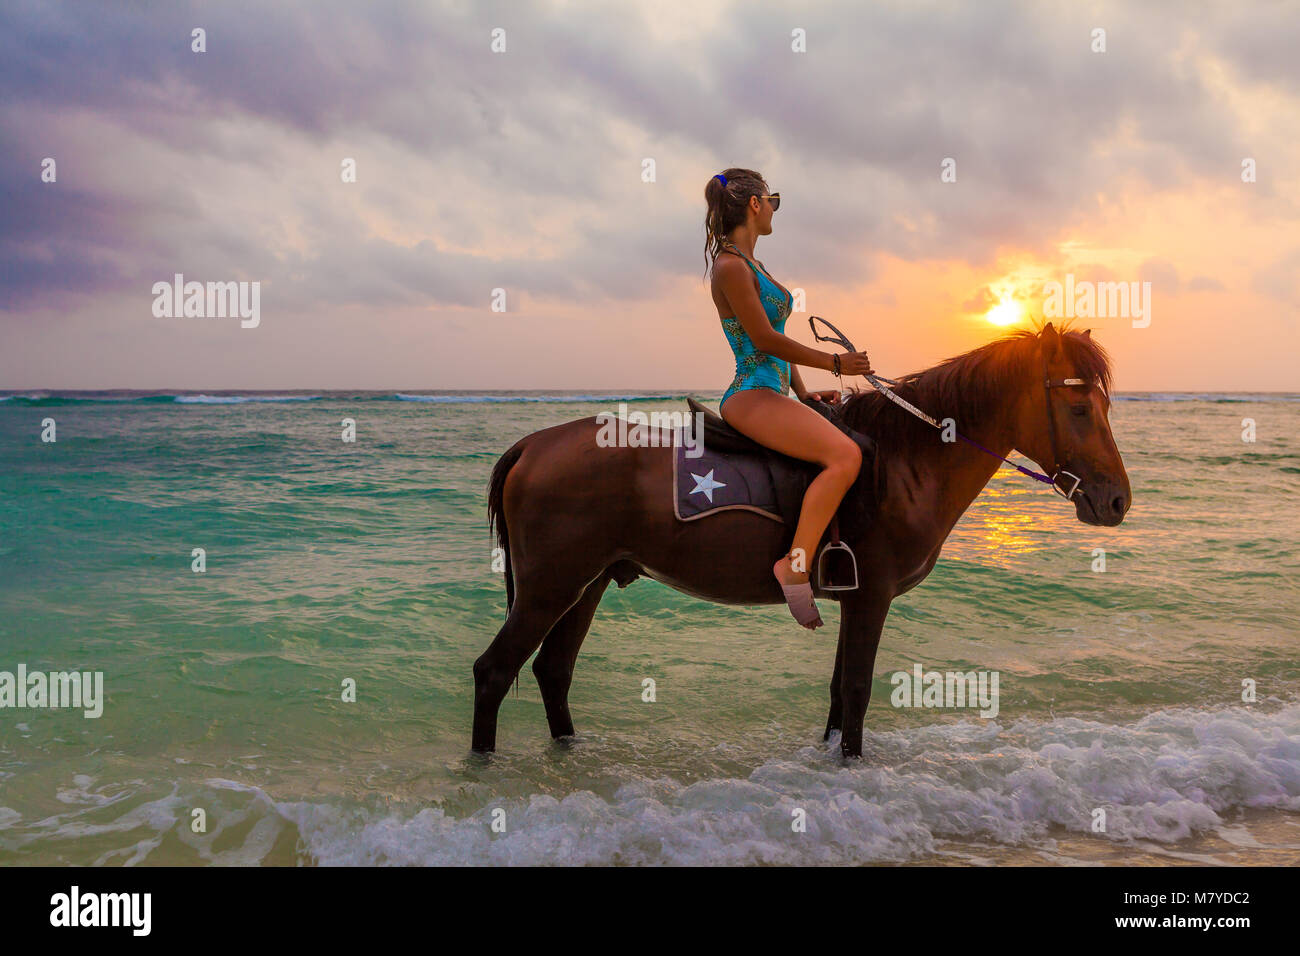 Beautiful girl riding a horse in the water, on the deserted beach of Gili Trawangan island, Indonesia, looking at the sunset over the sea Stock Photo